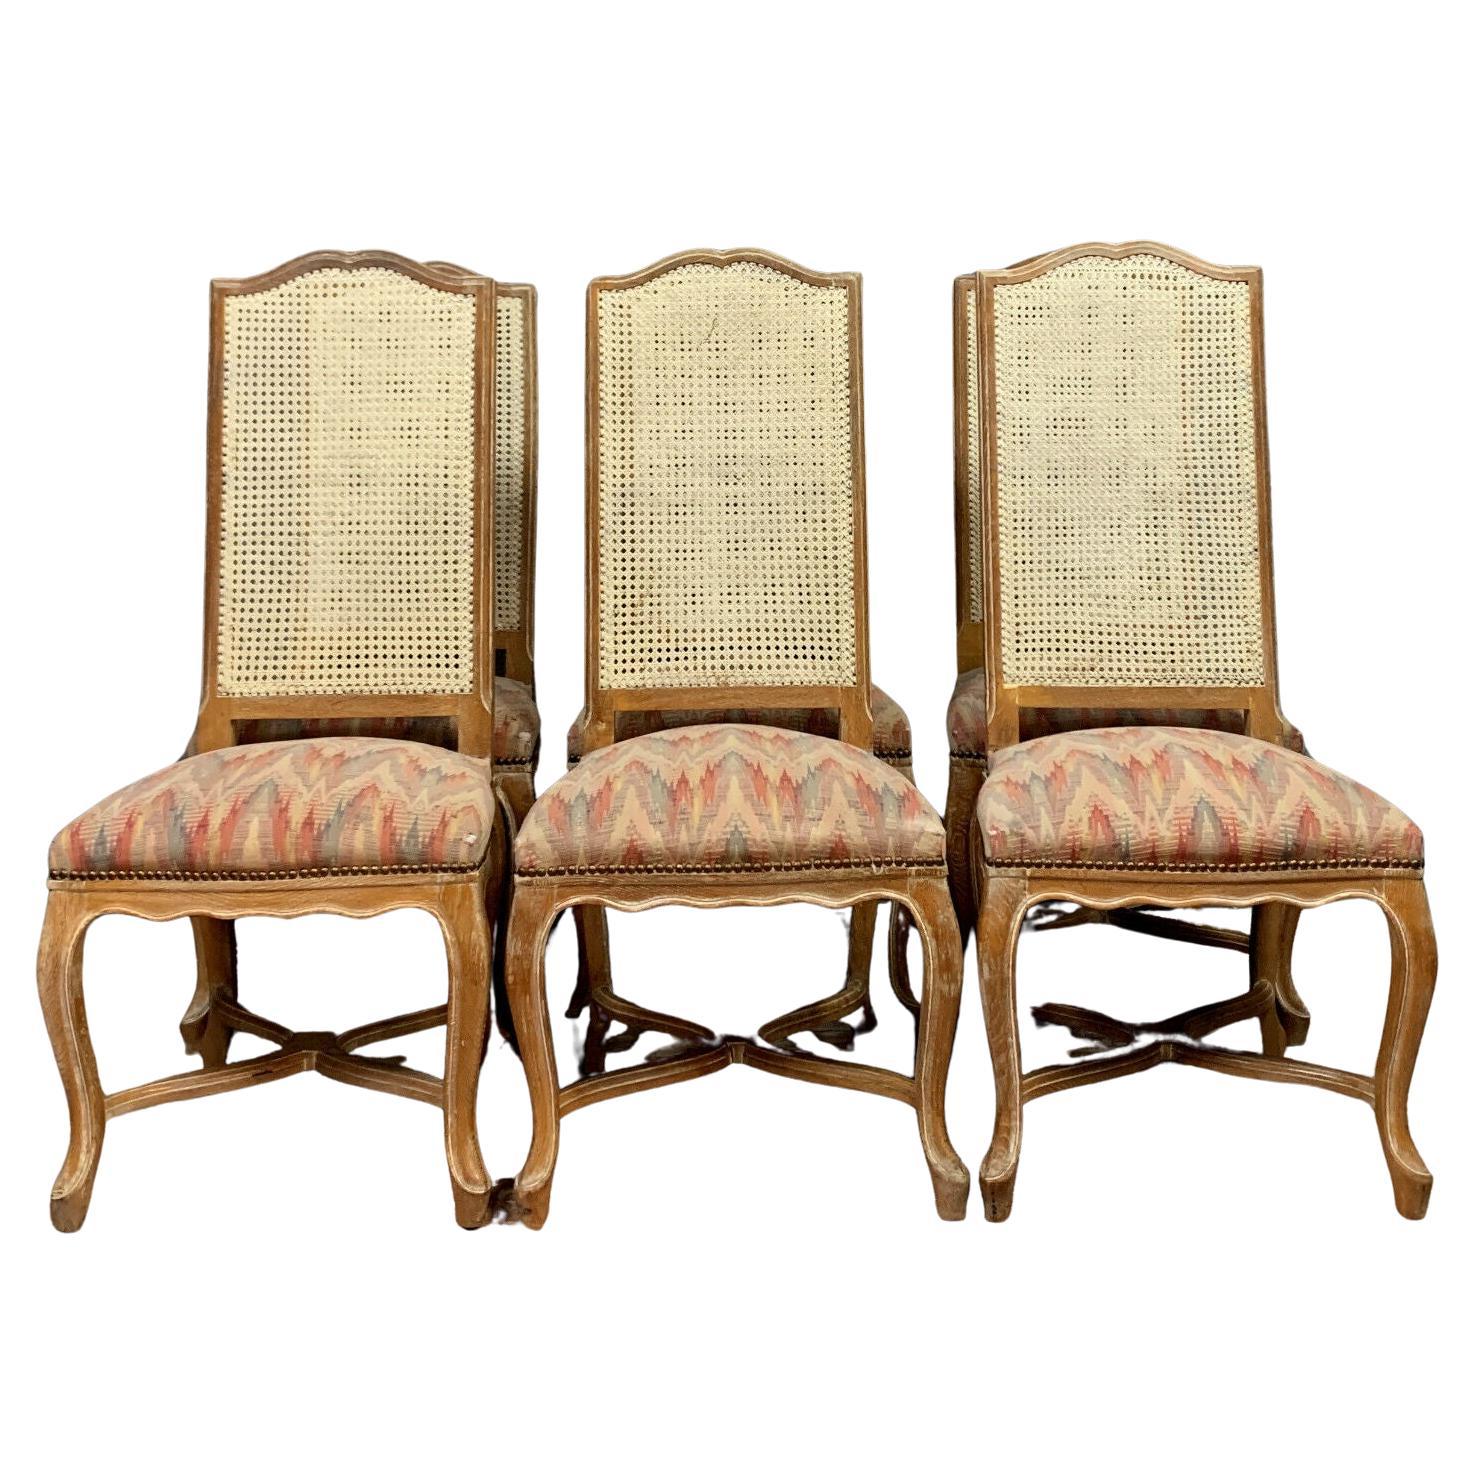 Stunning Set of 6 Louis XV High Back Cerused Wood Chairs circa 1900 -1X15